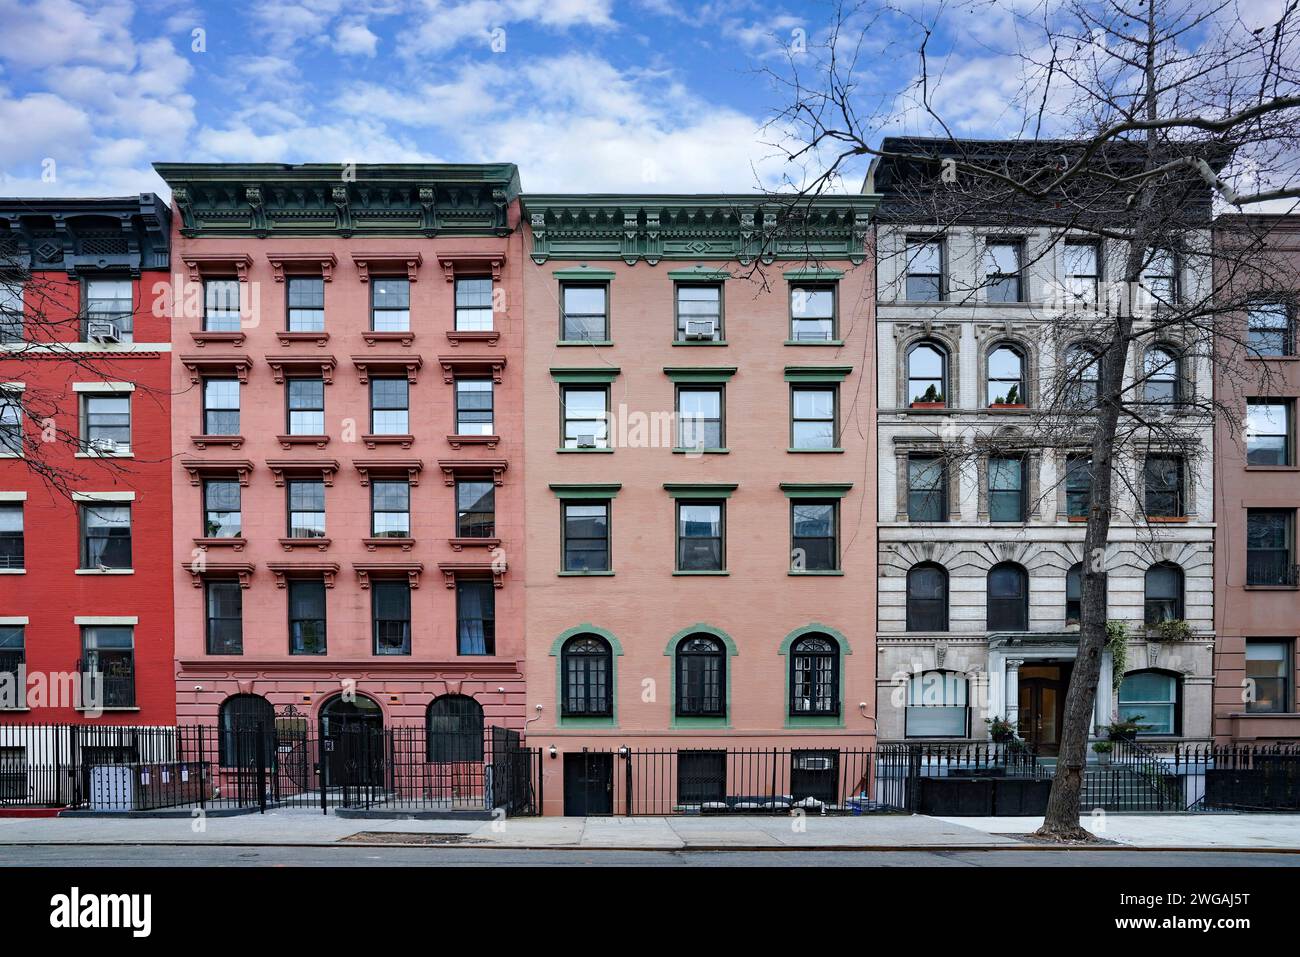 New York City old fashioned apartment buildings with ornate roof cornices Stock Photo